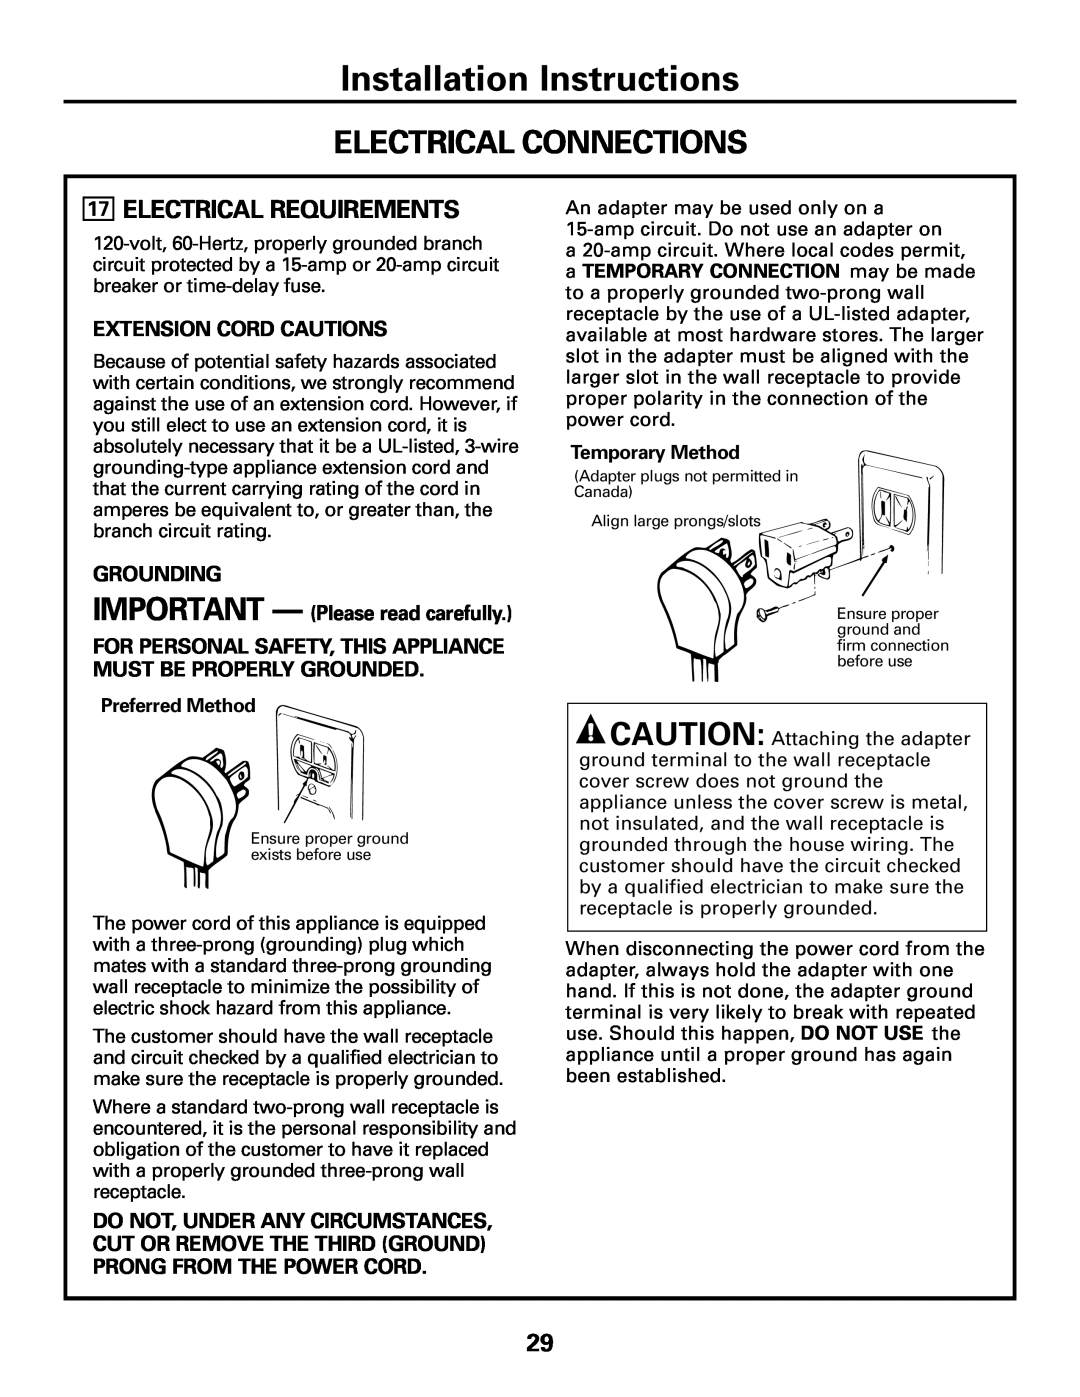 GE JGP989 Electrical Connections, Installation Instructions, Extension Cord Cautions, Preferred Method, Temporary Method 